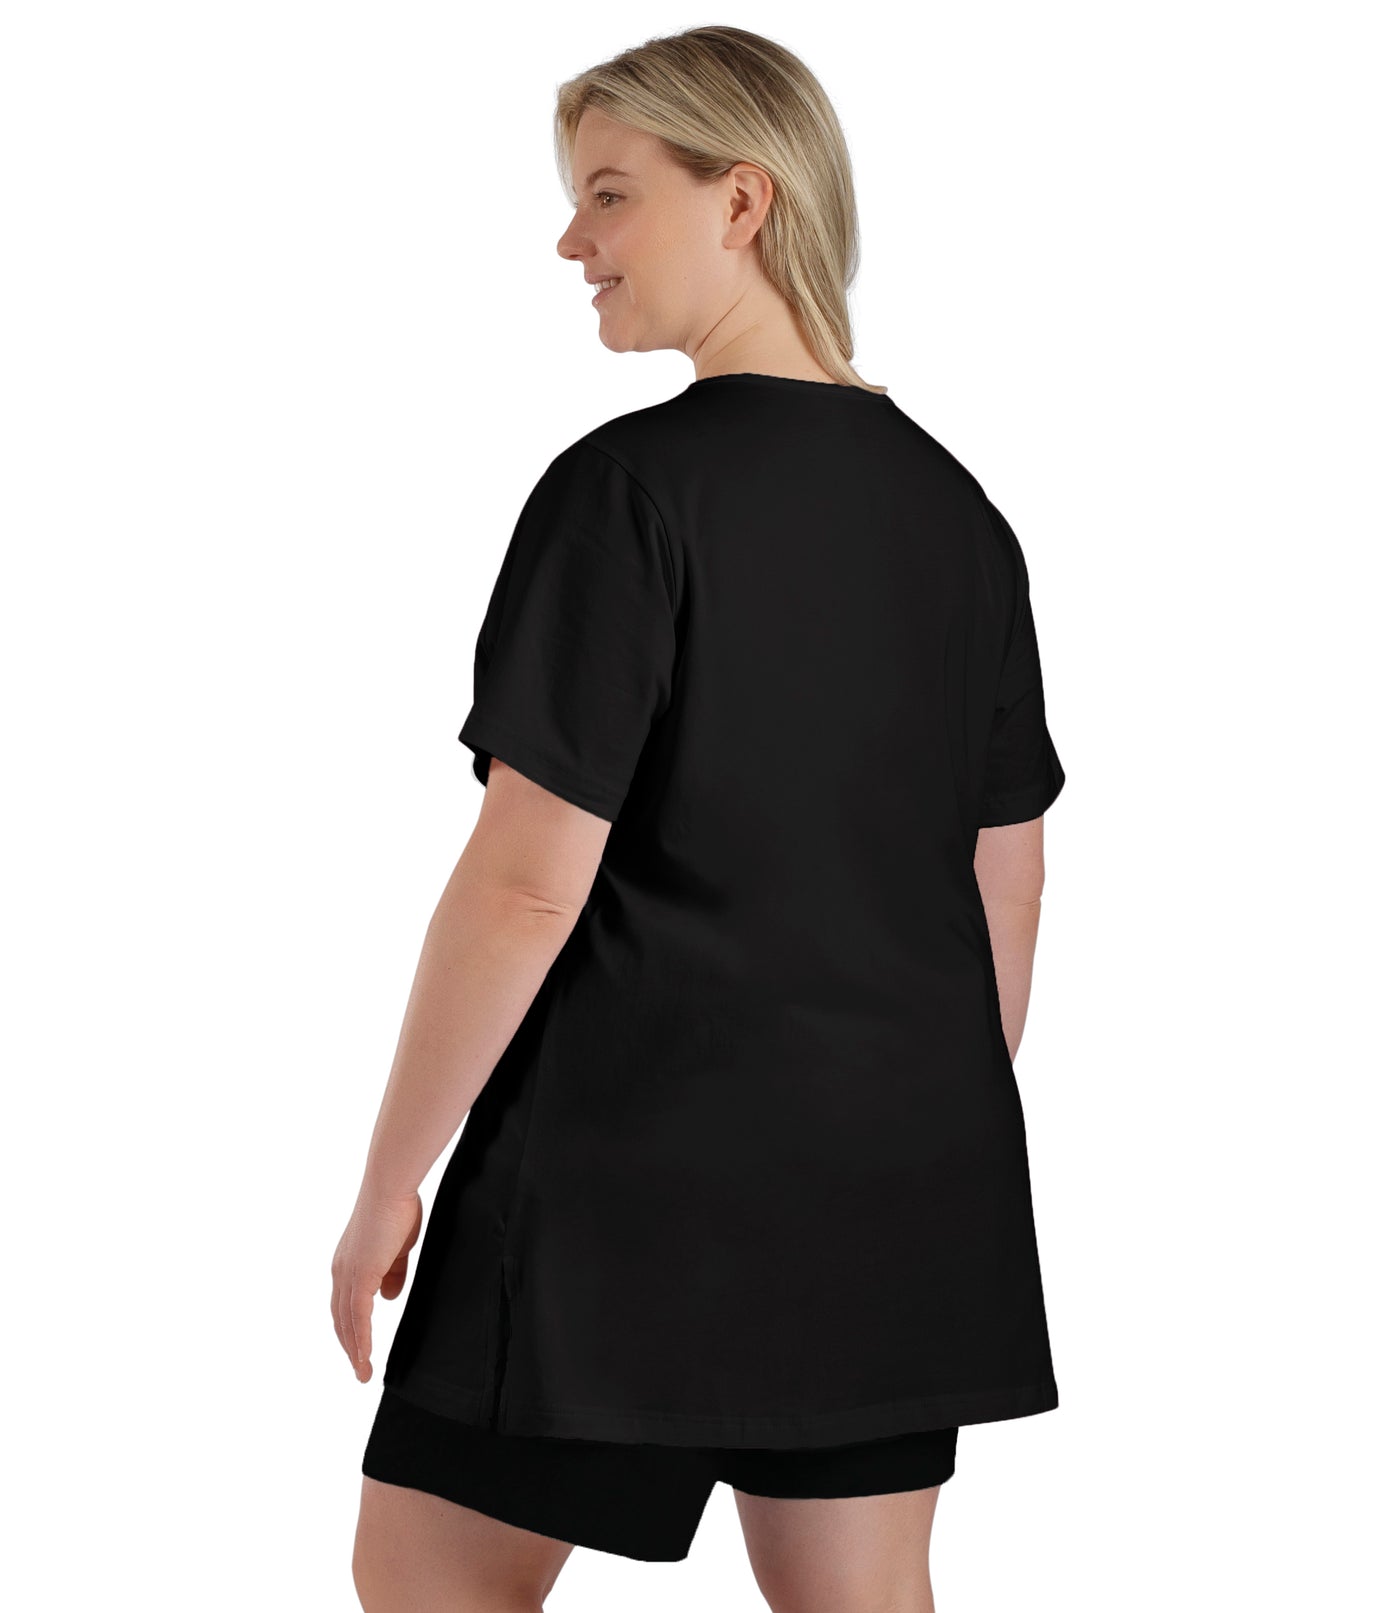 Plus size woman, facing back, wearing JunoBliss V-Neck Short Sleeve Top in color black. Hands down by sides.